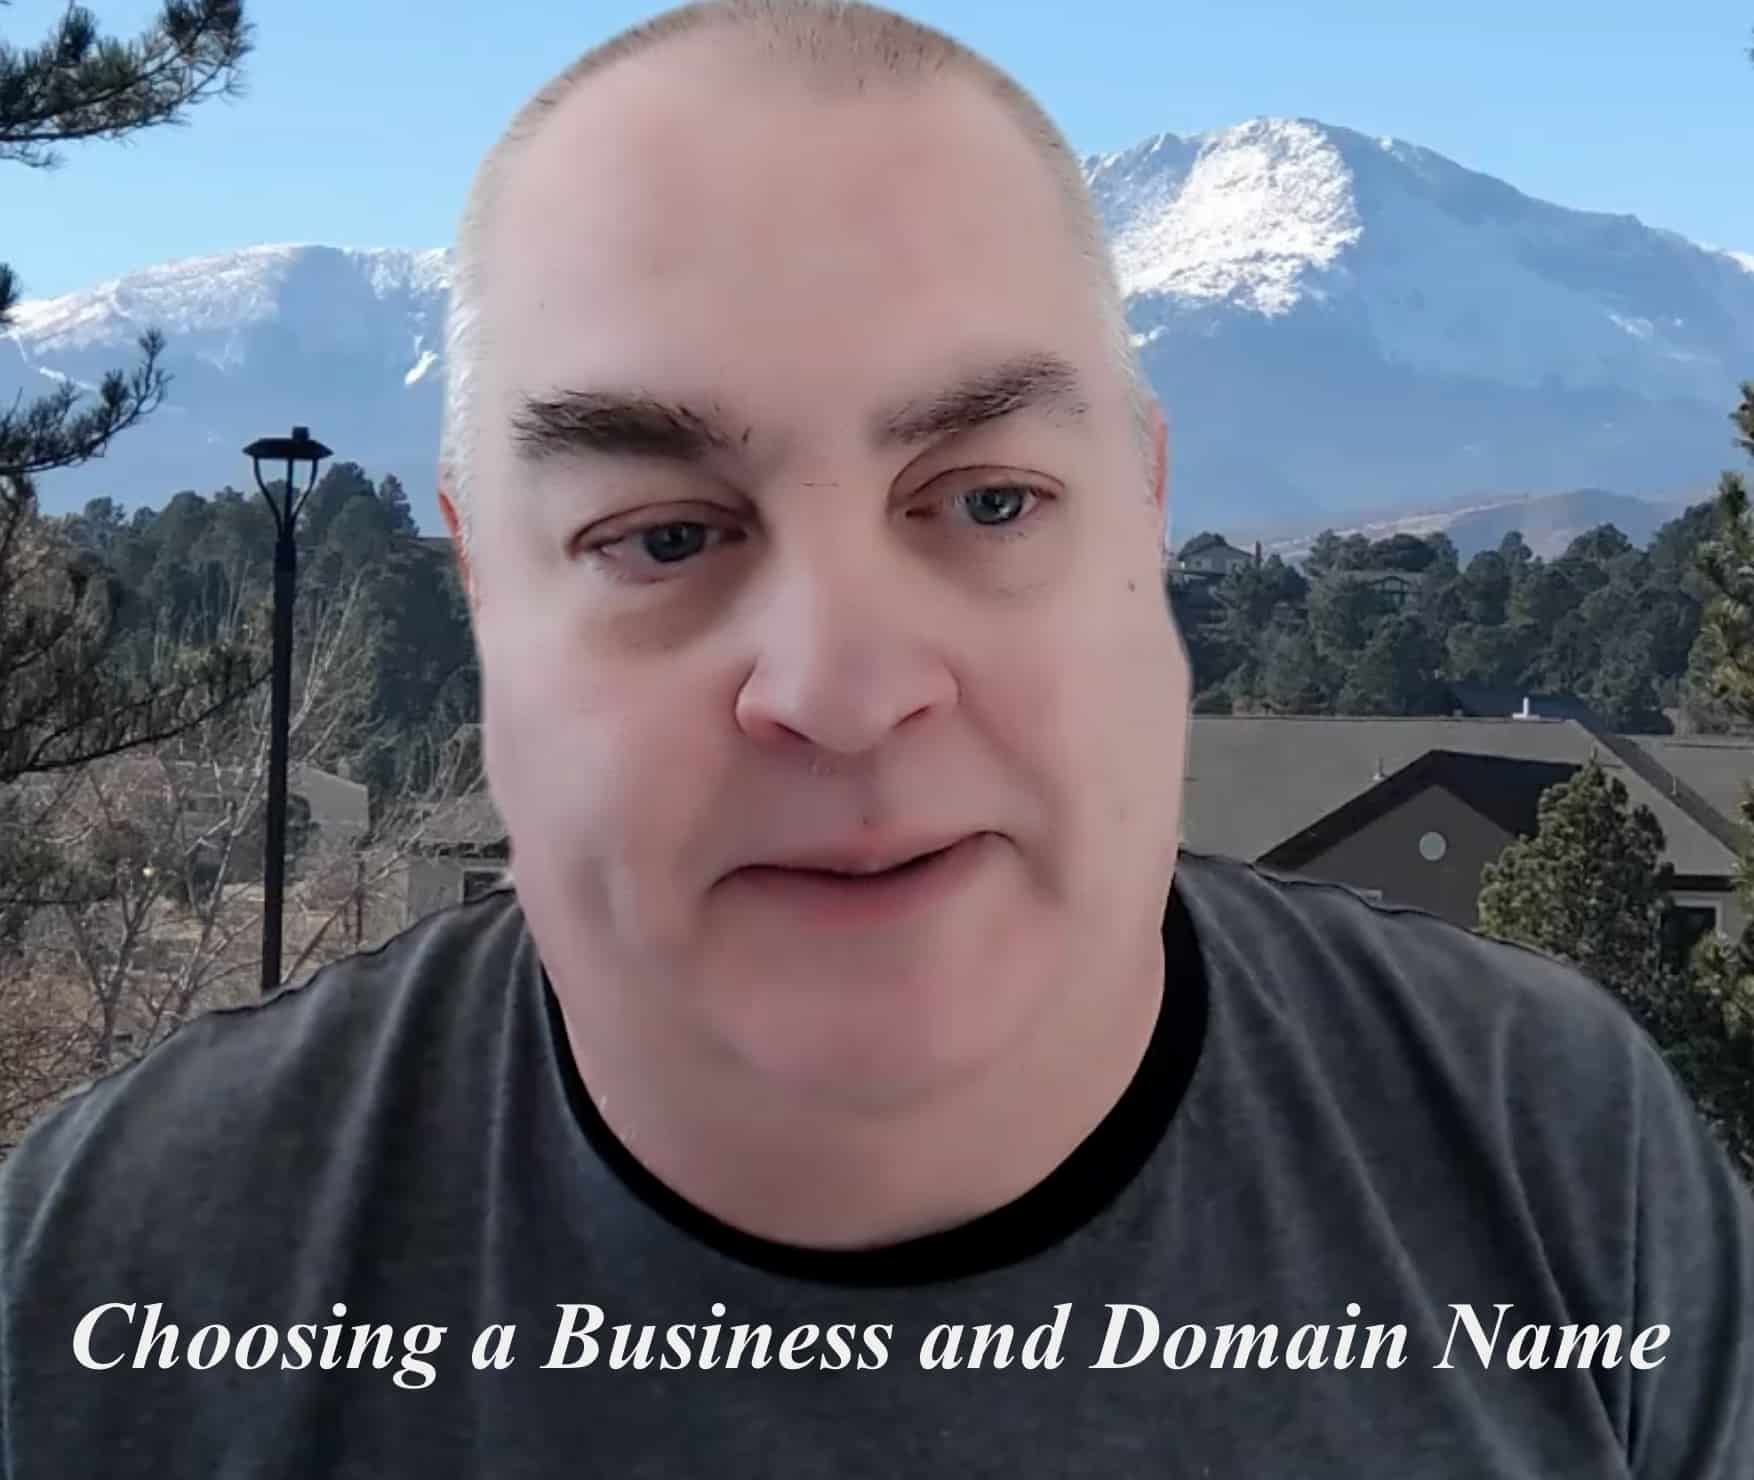 Choosing a business name and domain name